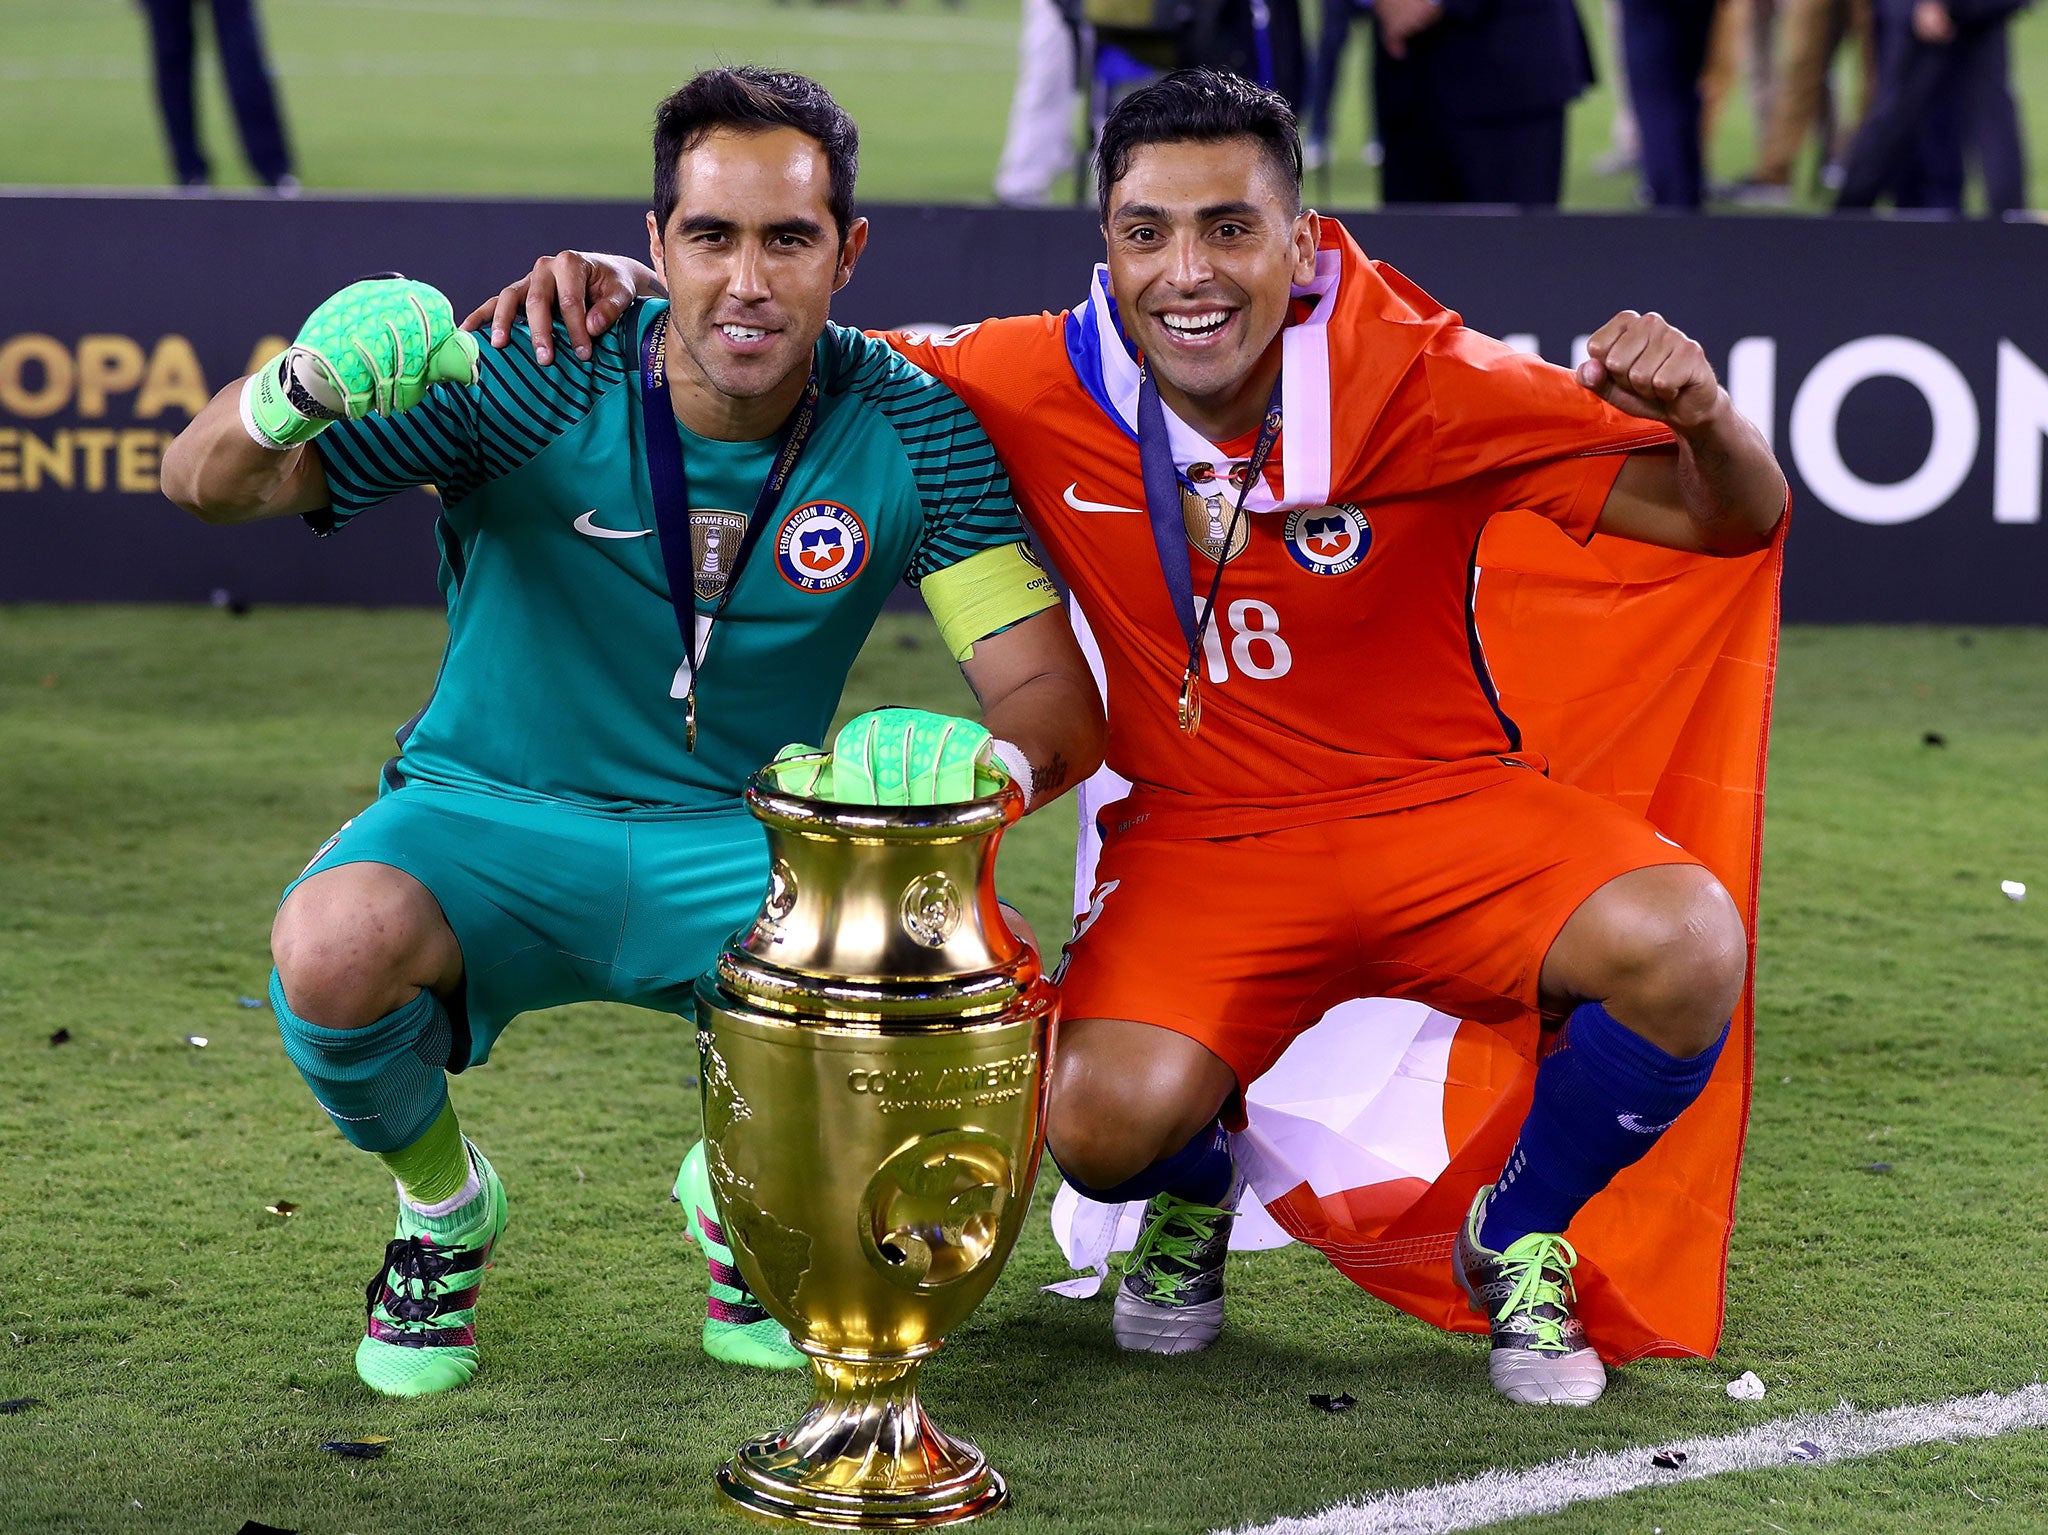 Claudio Bravo recently won the Copa America with Chile